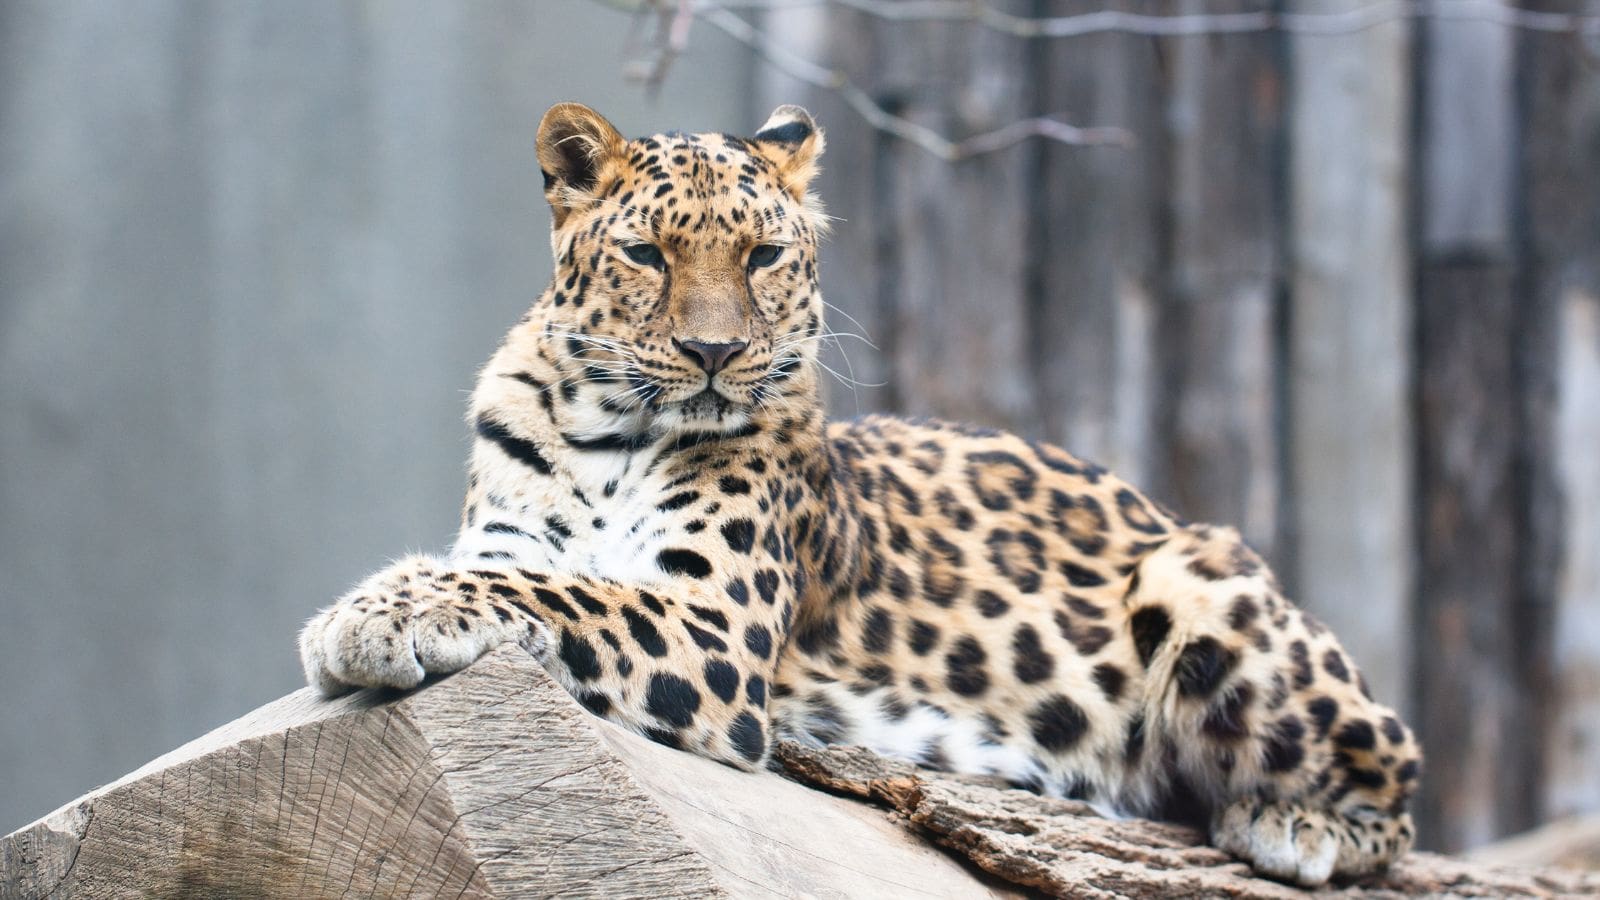 <p><span>According to the </span><a href="https://www.wwf.org.uk/learn/fascinating-facts/amur-leopards"><span>WWF</span></a><span>, the amur leopard has been critically endangered since the 1990s and is one of the rarest big cats across the globe. It is believed that fewer than 100 of these leopards exist in the wild, identified by their lengthy legs, iconic spotted fur, and adaptability to both hot and cold climates. There have been some efforts to preserve amur leopards’ habitats and increase the population via breeding programs.</span></p>